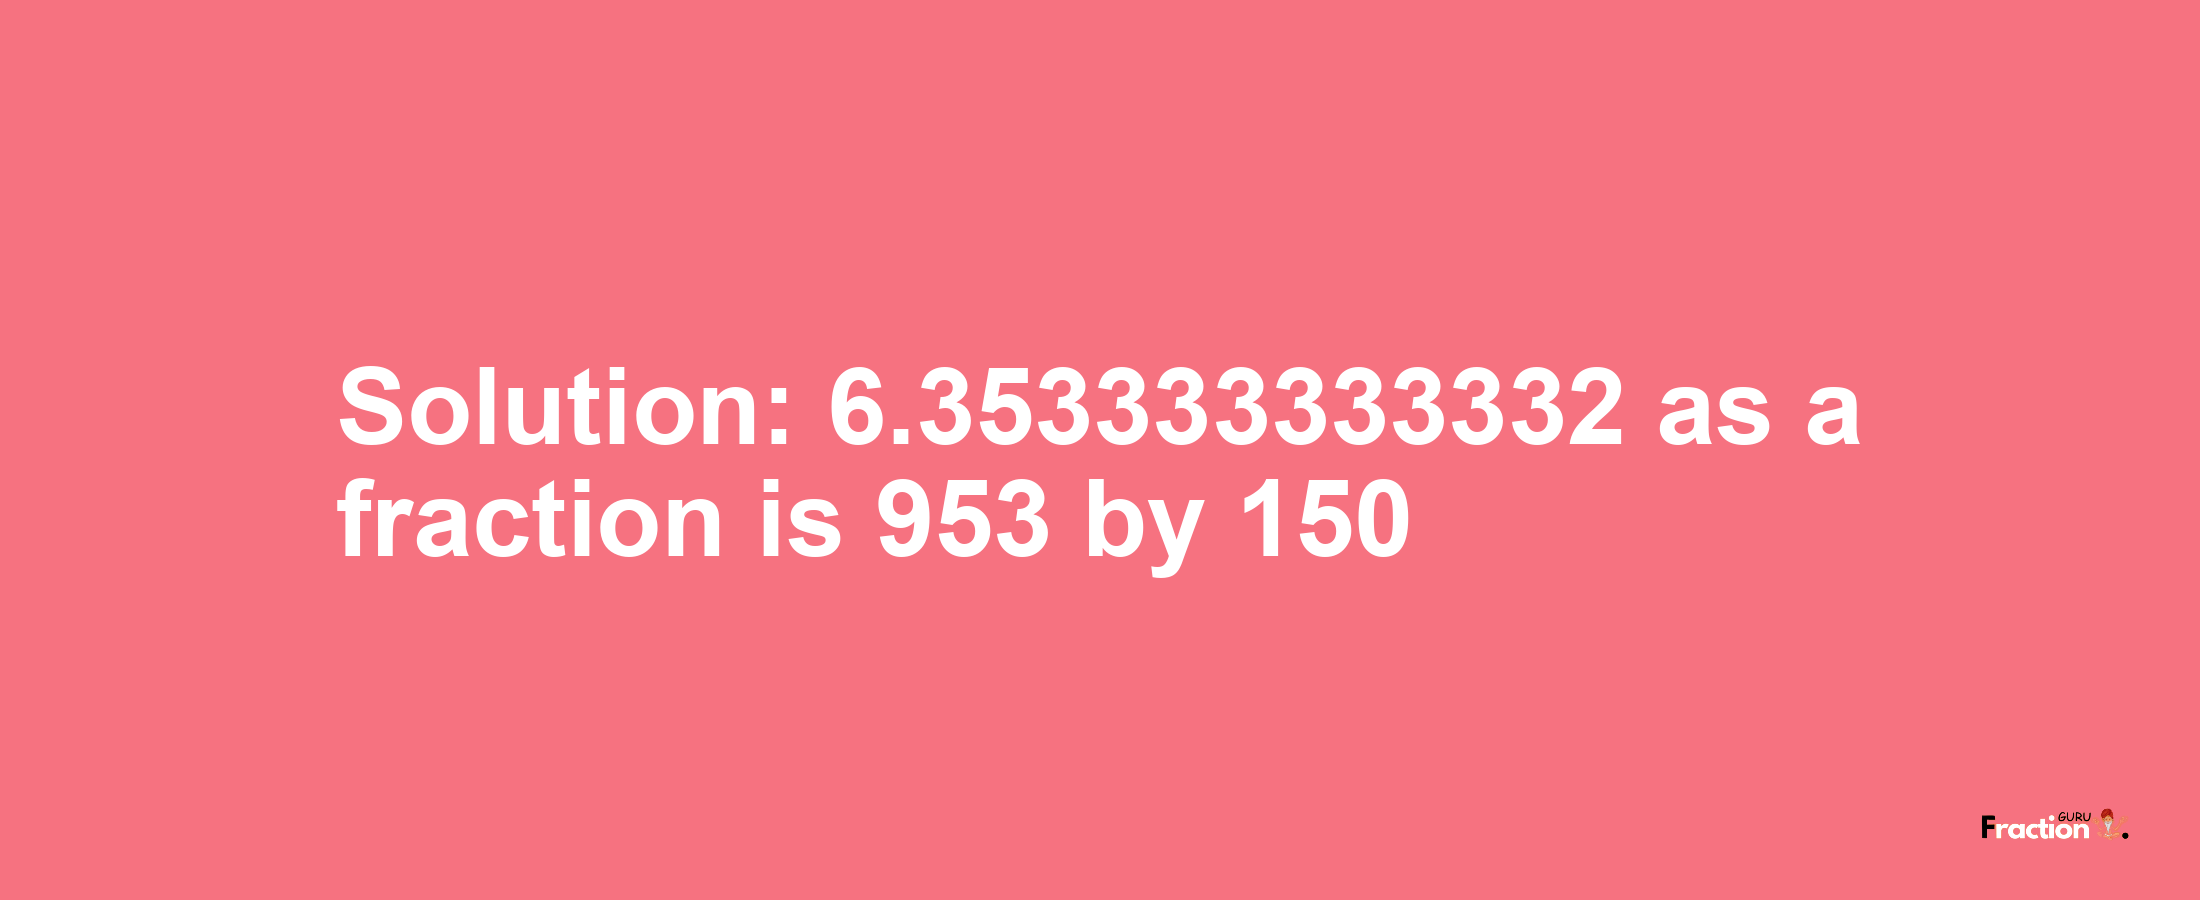 Solution:6.353333333332 as a fraction is 953/150